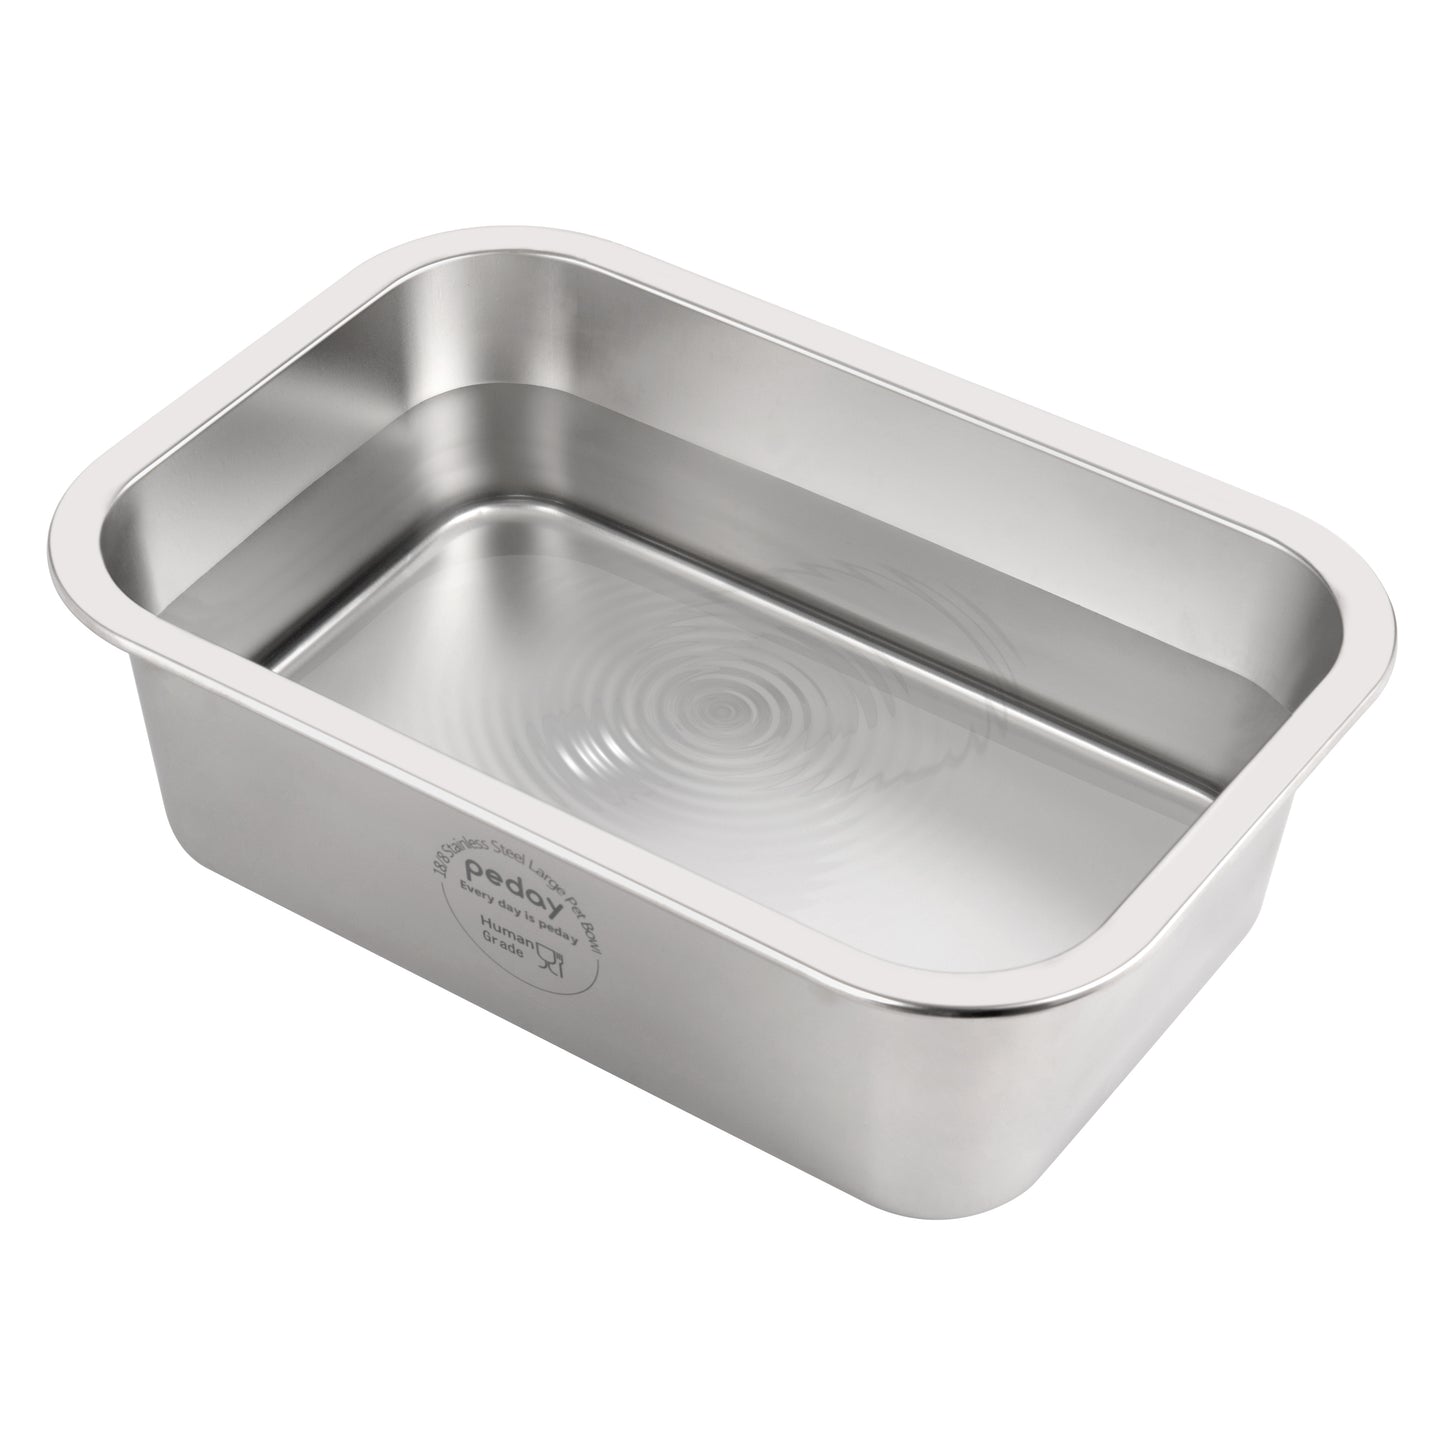 2 PCS Extra Large Dog Water Bowl outside - 2.57 Gallons Each for Large Dogs  and Multi-Pet Households - Easy to Clean, Can be Used for Water or Food